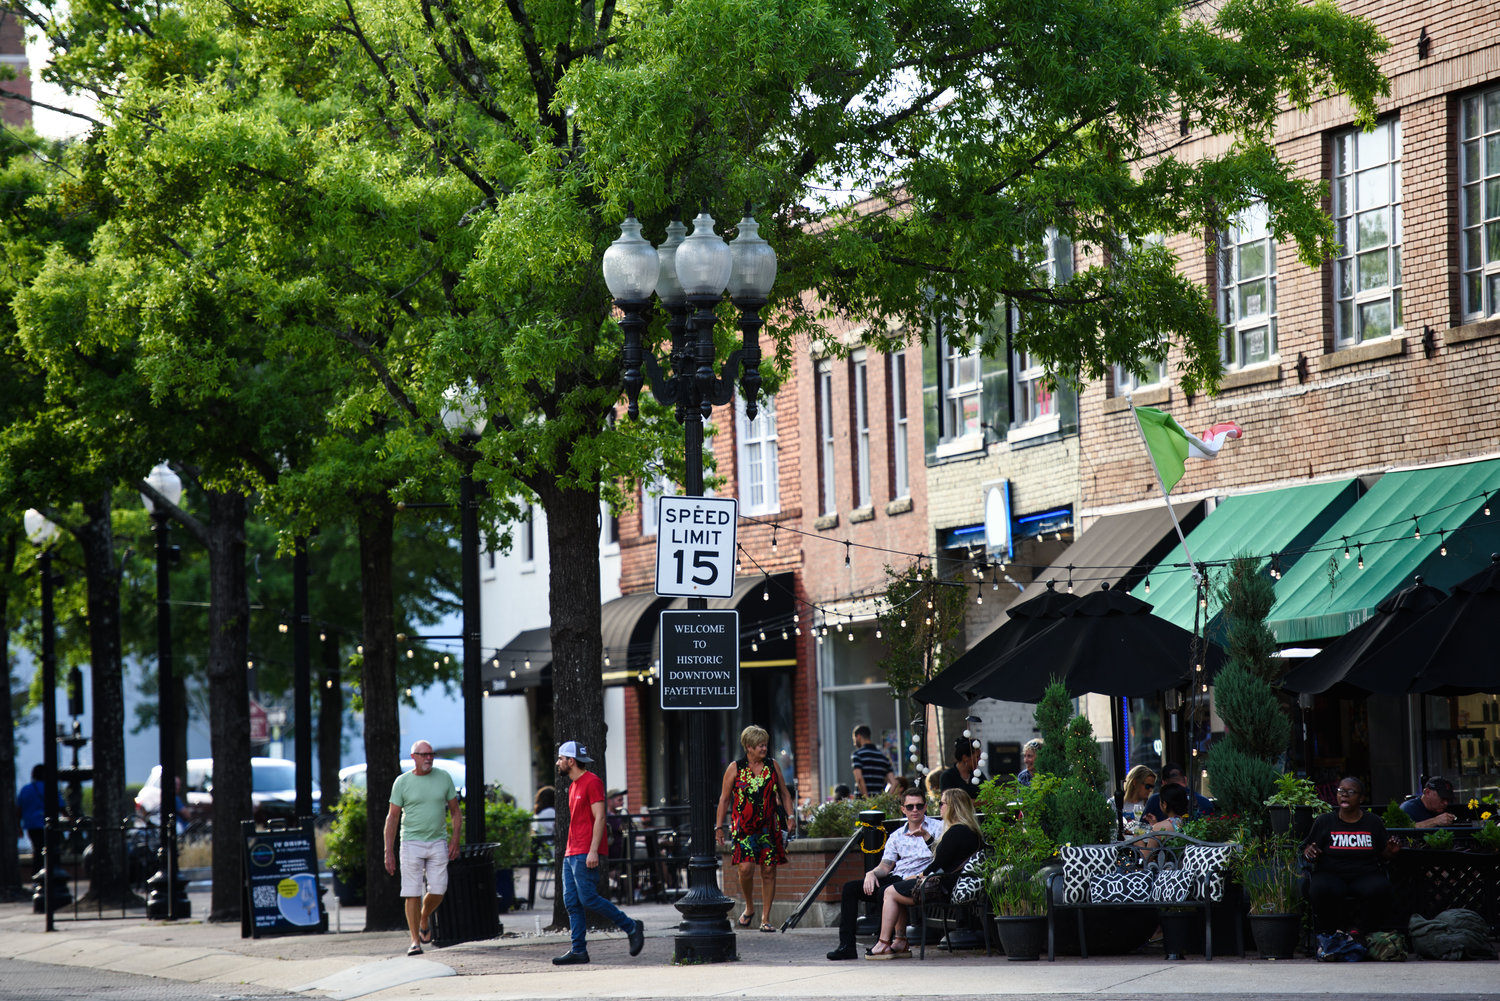 Fayetteville could join other cities that allow people to purchase alcoholic beverages from licensed businesses and then walk around within a designated area known as a social district. The Cool Spring Downtown District is conducting a survey to get community feedback on a proposed social district for the downtown area.